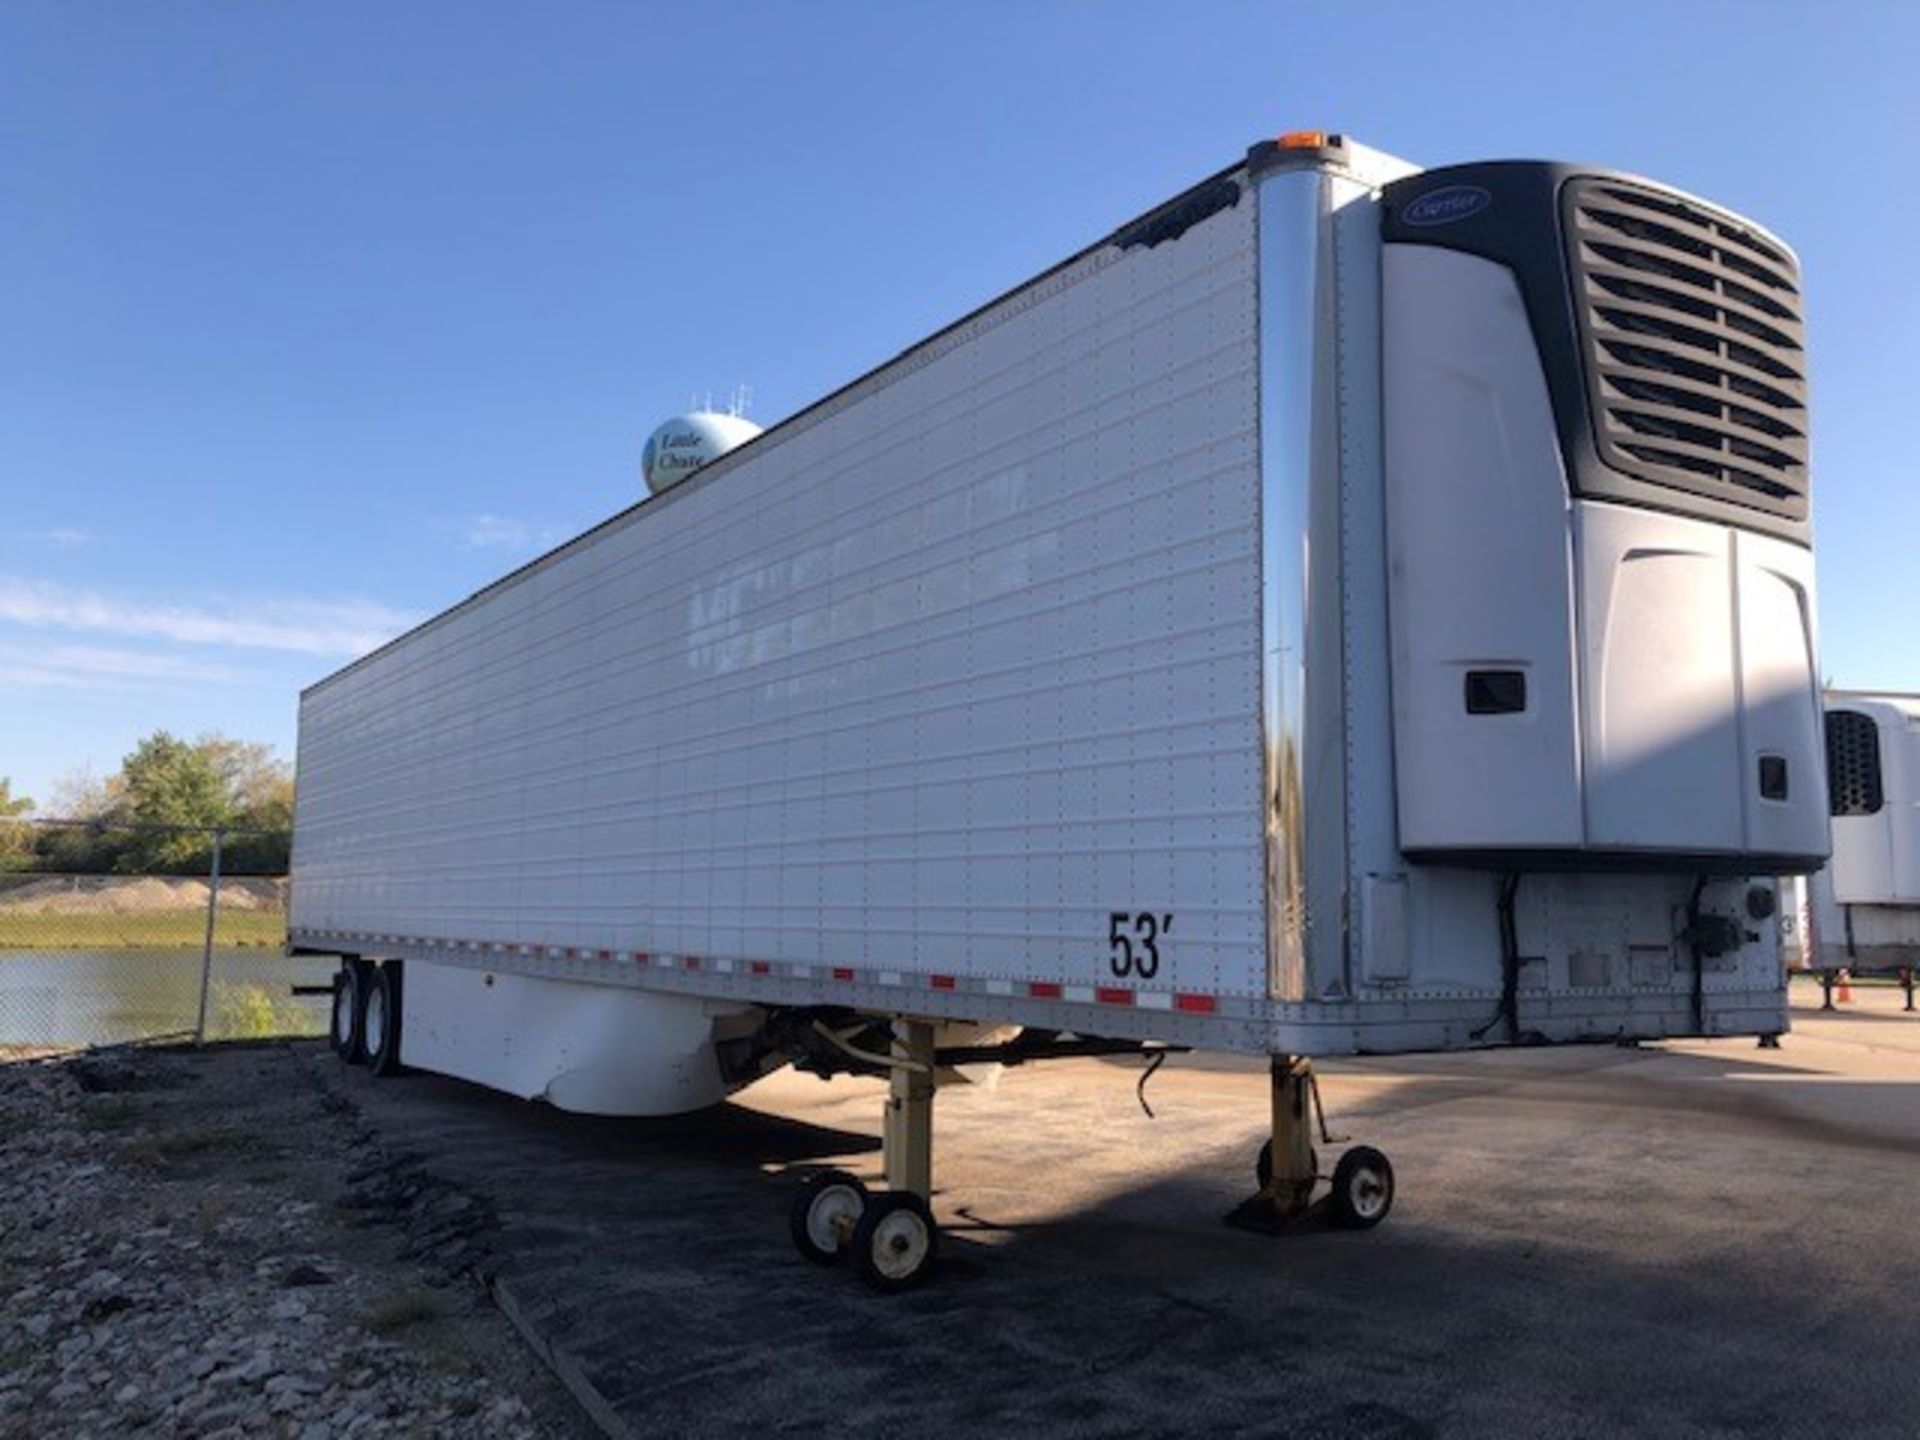 2009 Great Dane Refrigerated Trailer, VIN#: 1GRAA0626AW702306, M/N SUP-111411G53, with Carrier Refer - Image 4 of 21